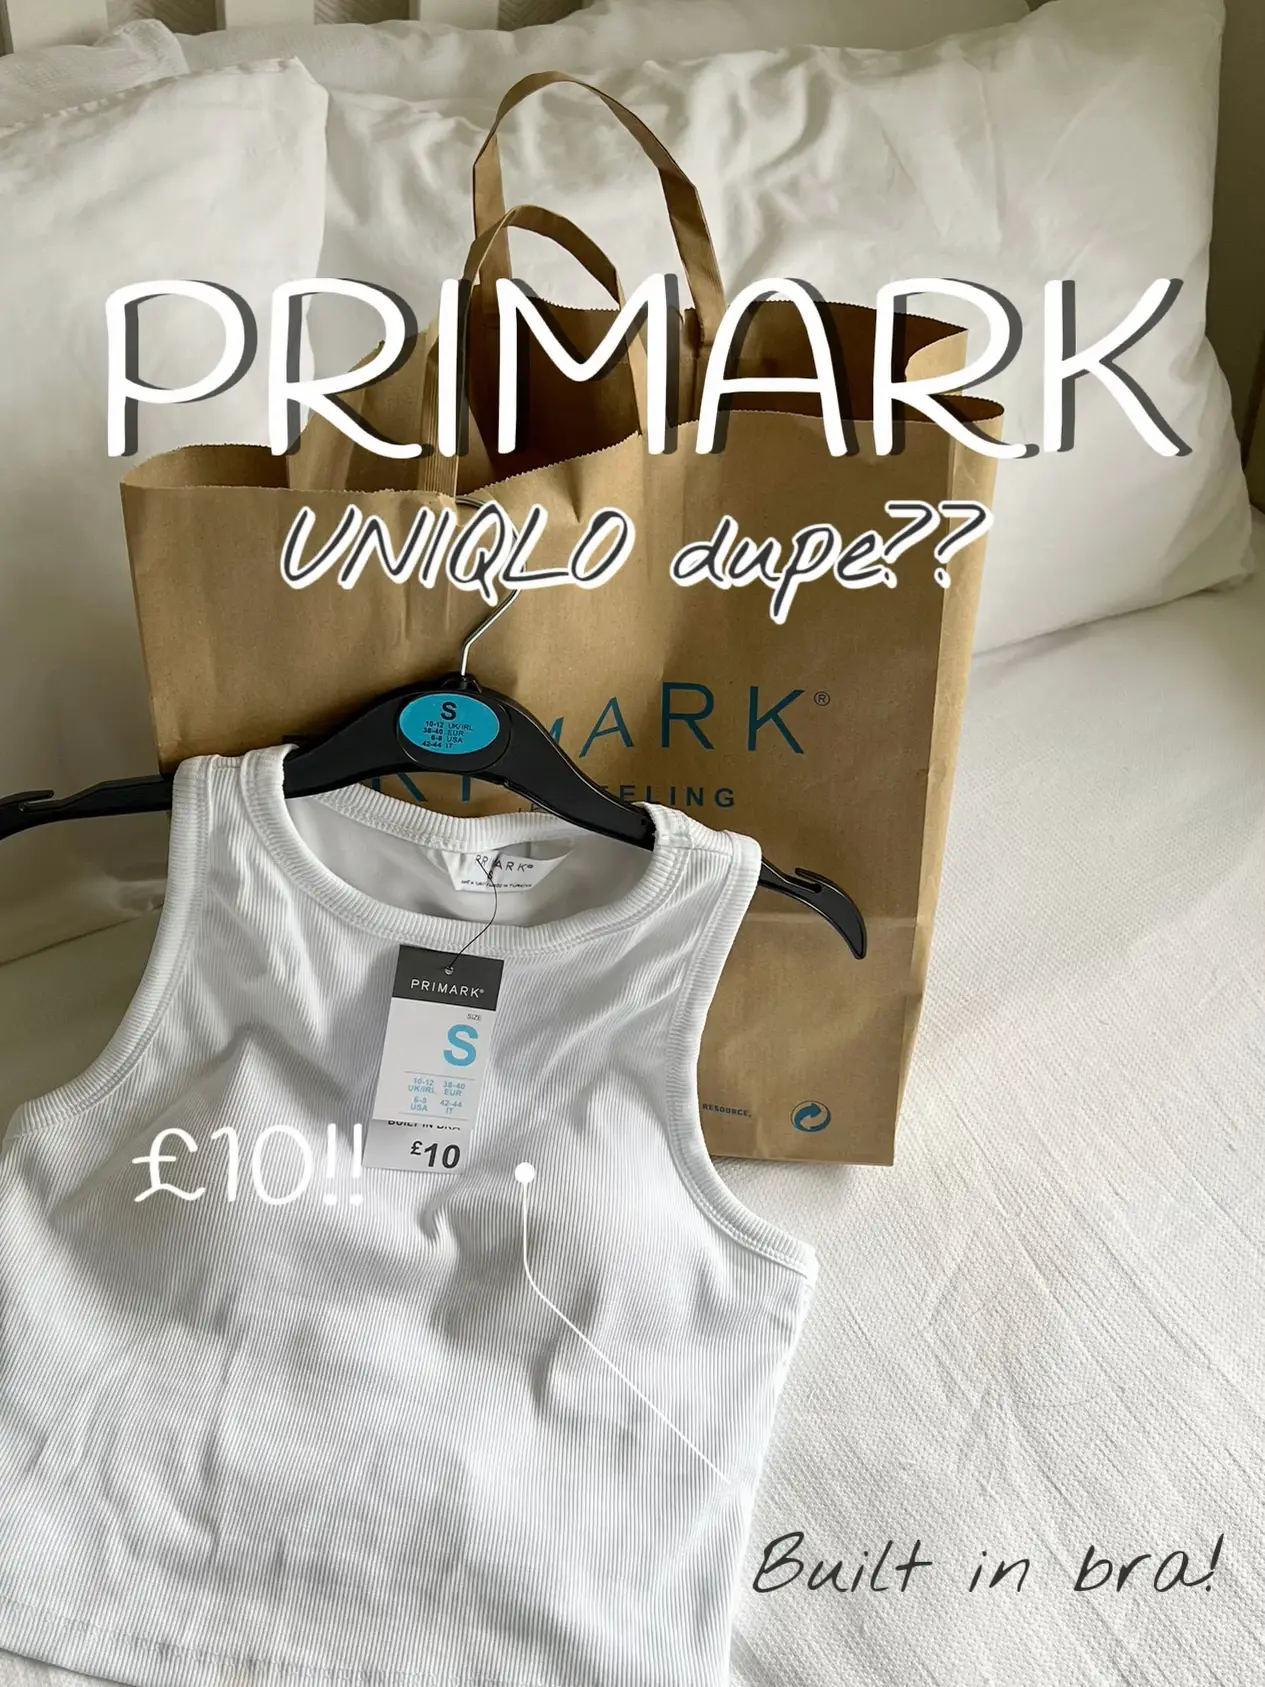 Primark built in bra top, UNIQLO dupe??, Gallery posted by sian